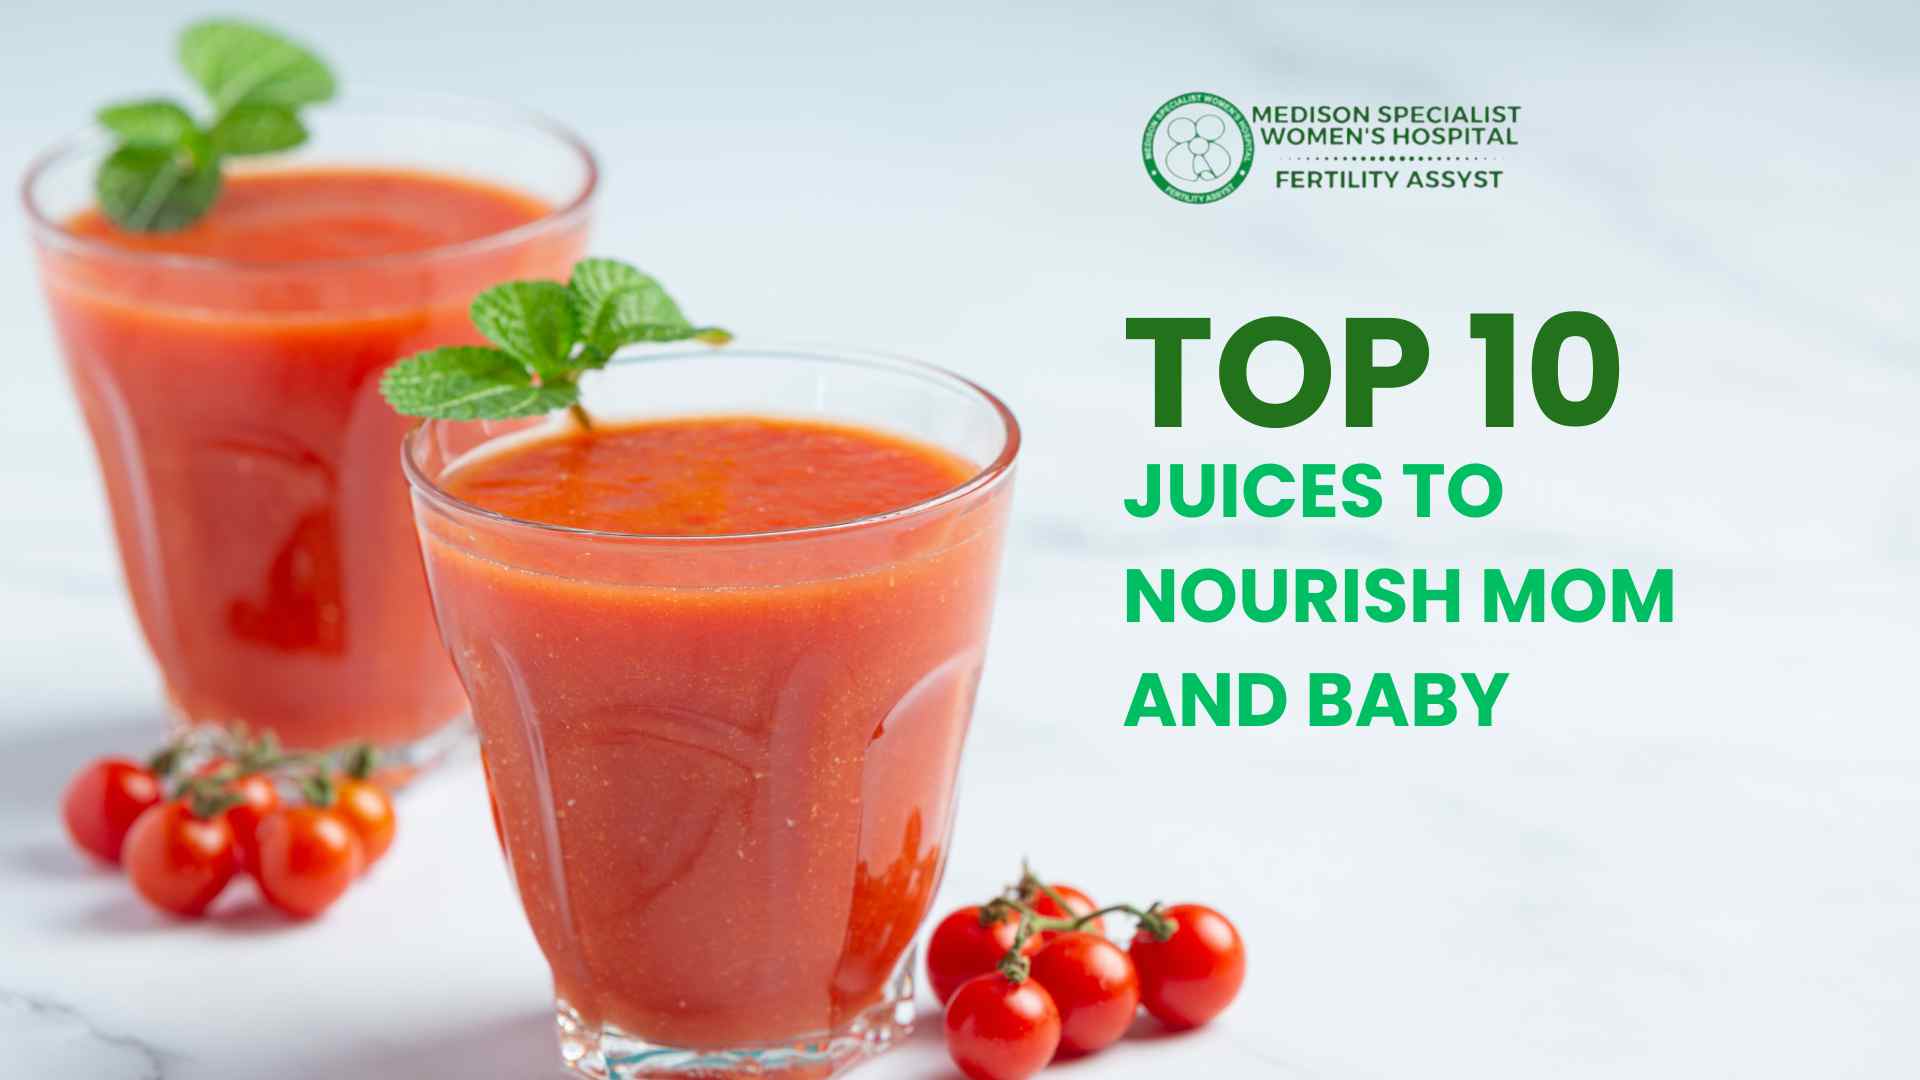 Top 10 Juices to Nourish Mom and Baby